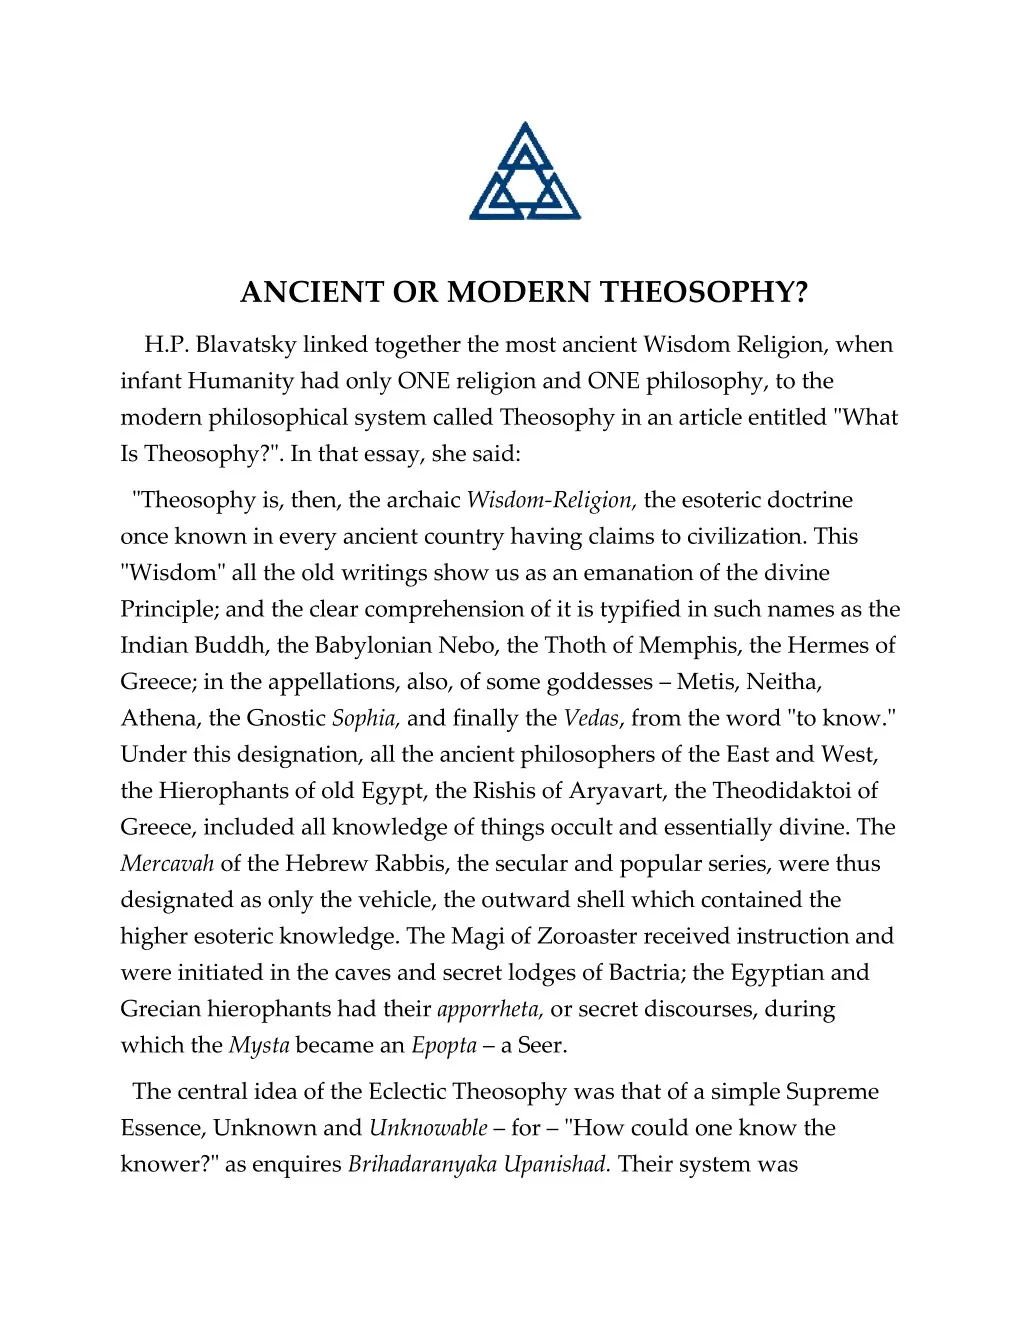 ancient or modern theosophy